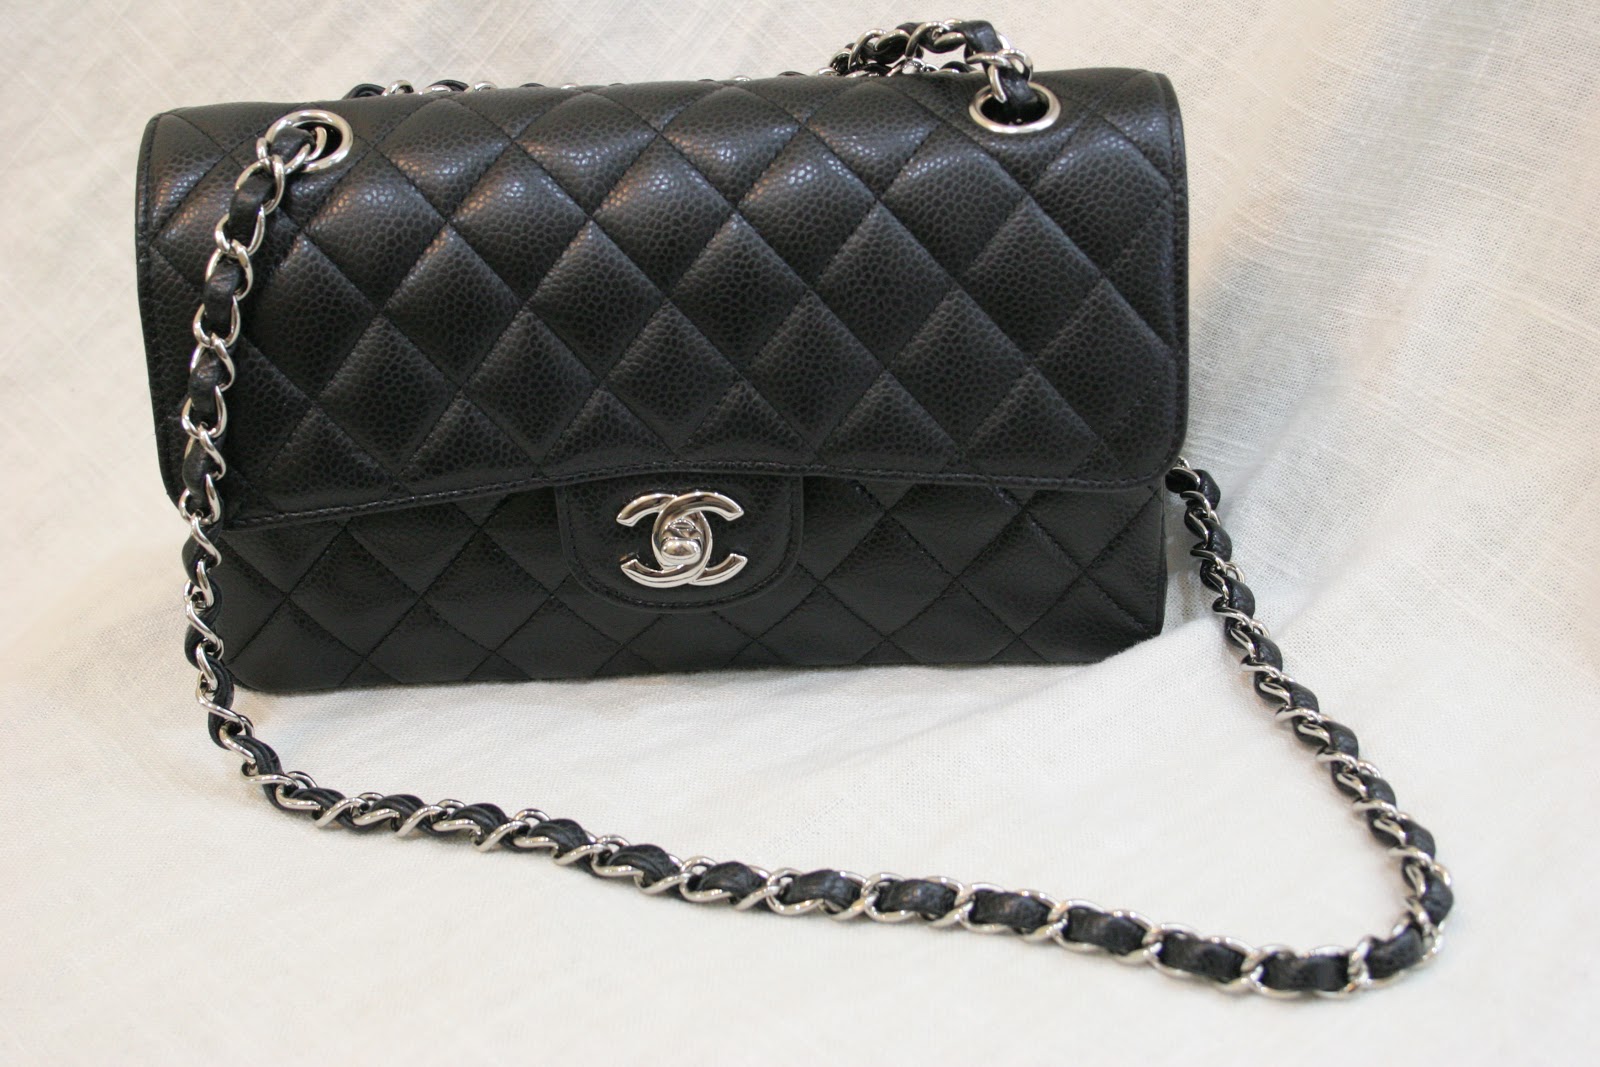 ... Chanel 2.55 Medium Classic Flap Bag in Black Caviar Quilted Leather